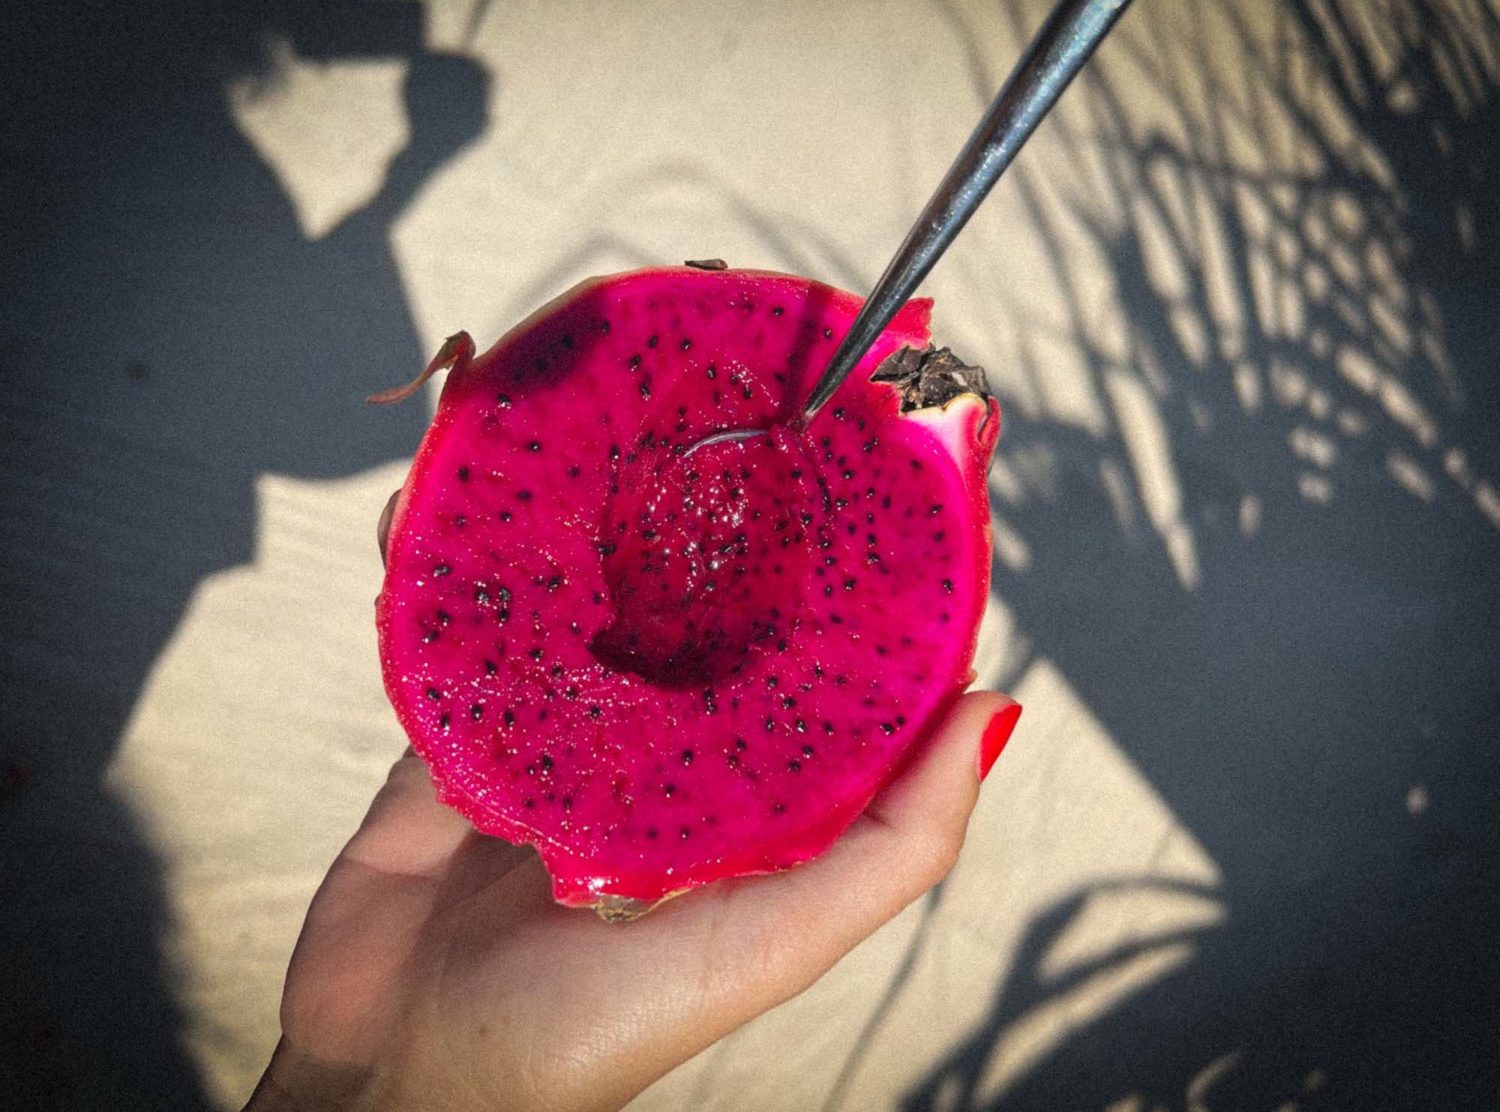 The Sanubari Originally from Central America, the gorgeous looking local dragon fruit, full of vitamin C, carotenoids, and natural sugars, was my go-to pick-me-up, any time of the day 